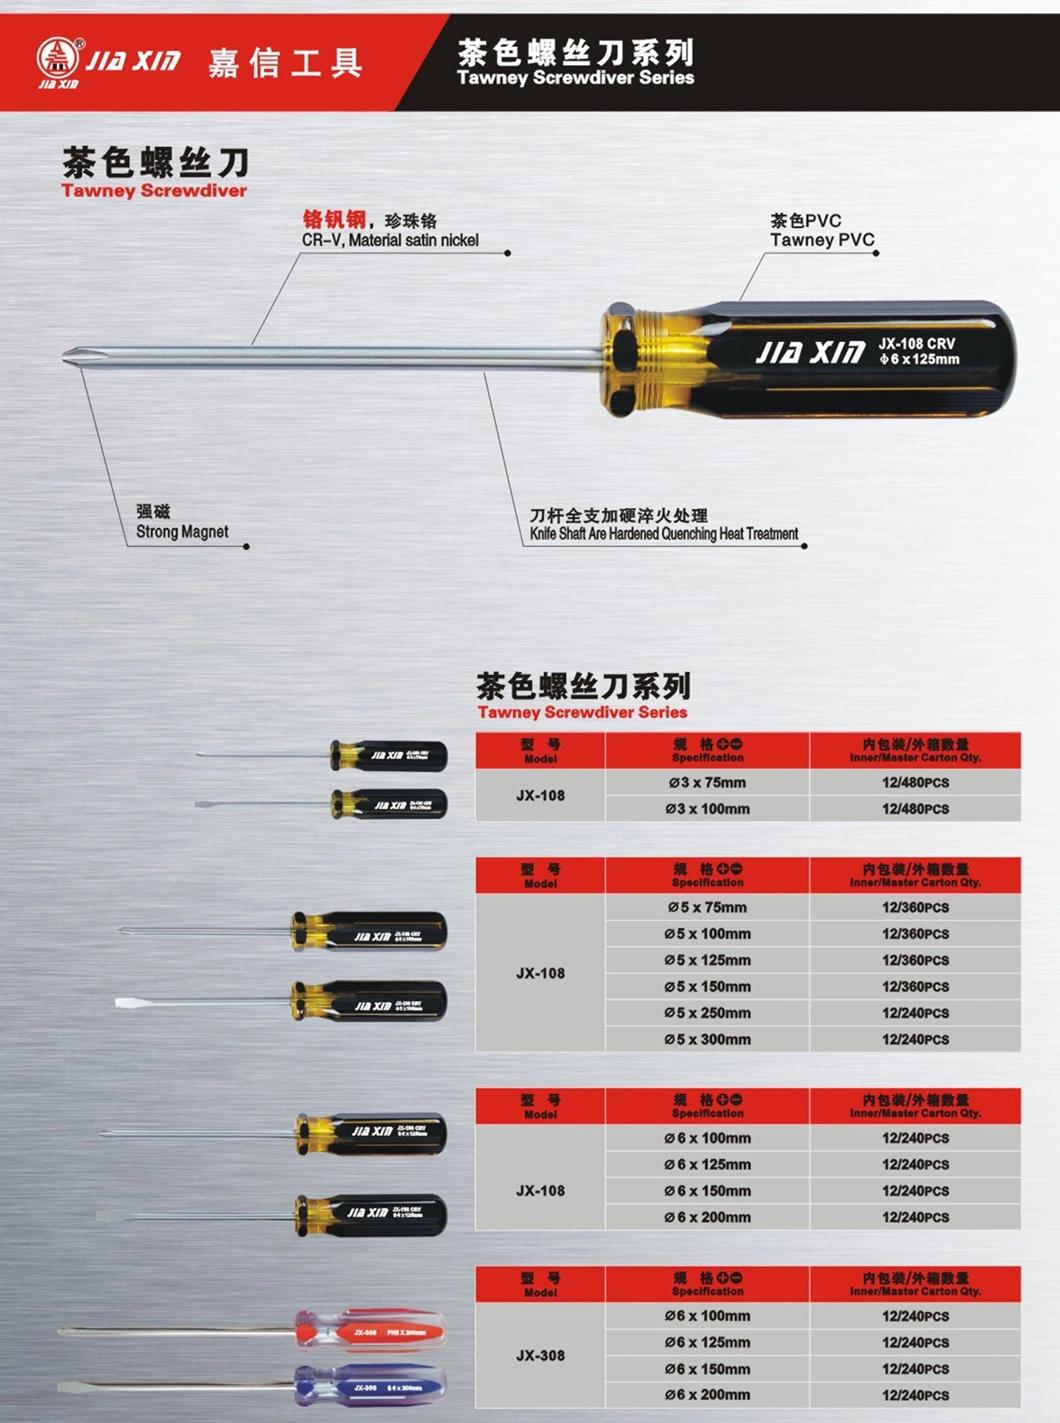 Screwdriver Series Products Are Hardened and Hardened with High Quality